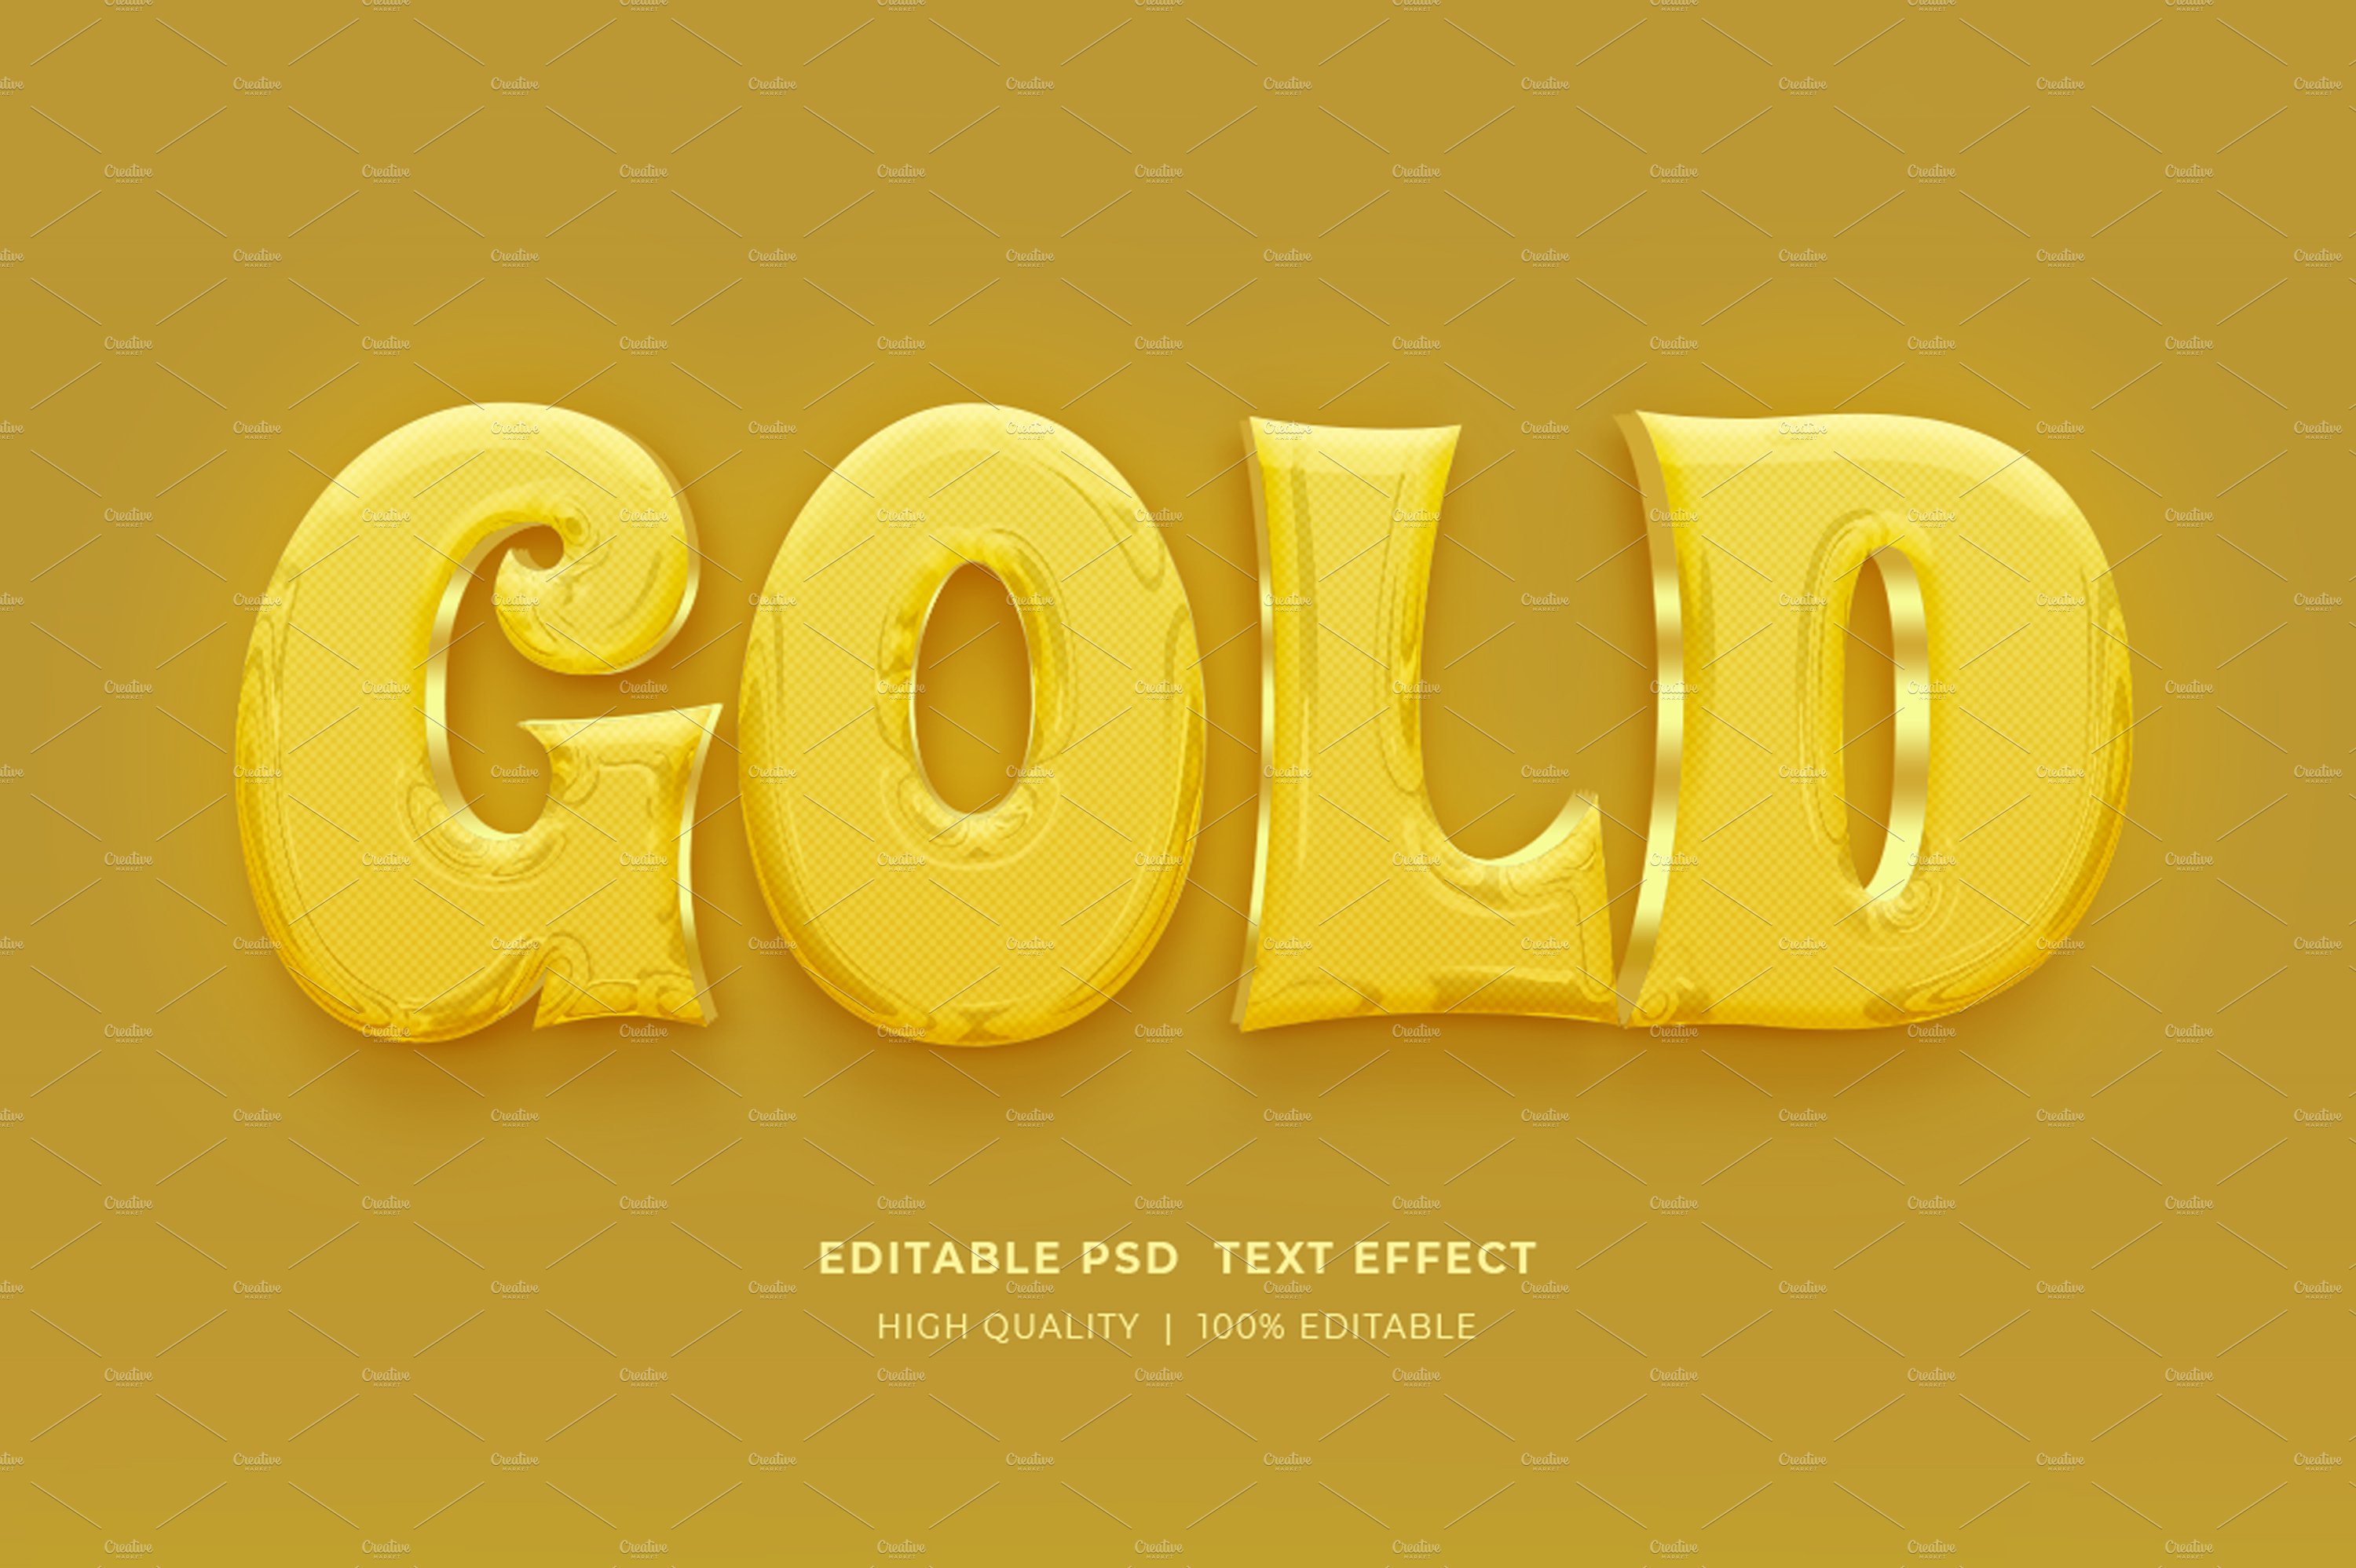 Editable 3D Text Style Effect Bundlepreview image.